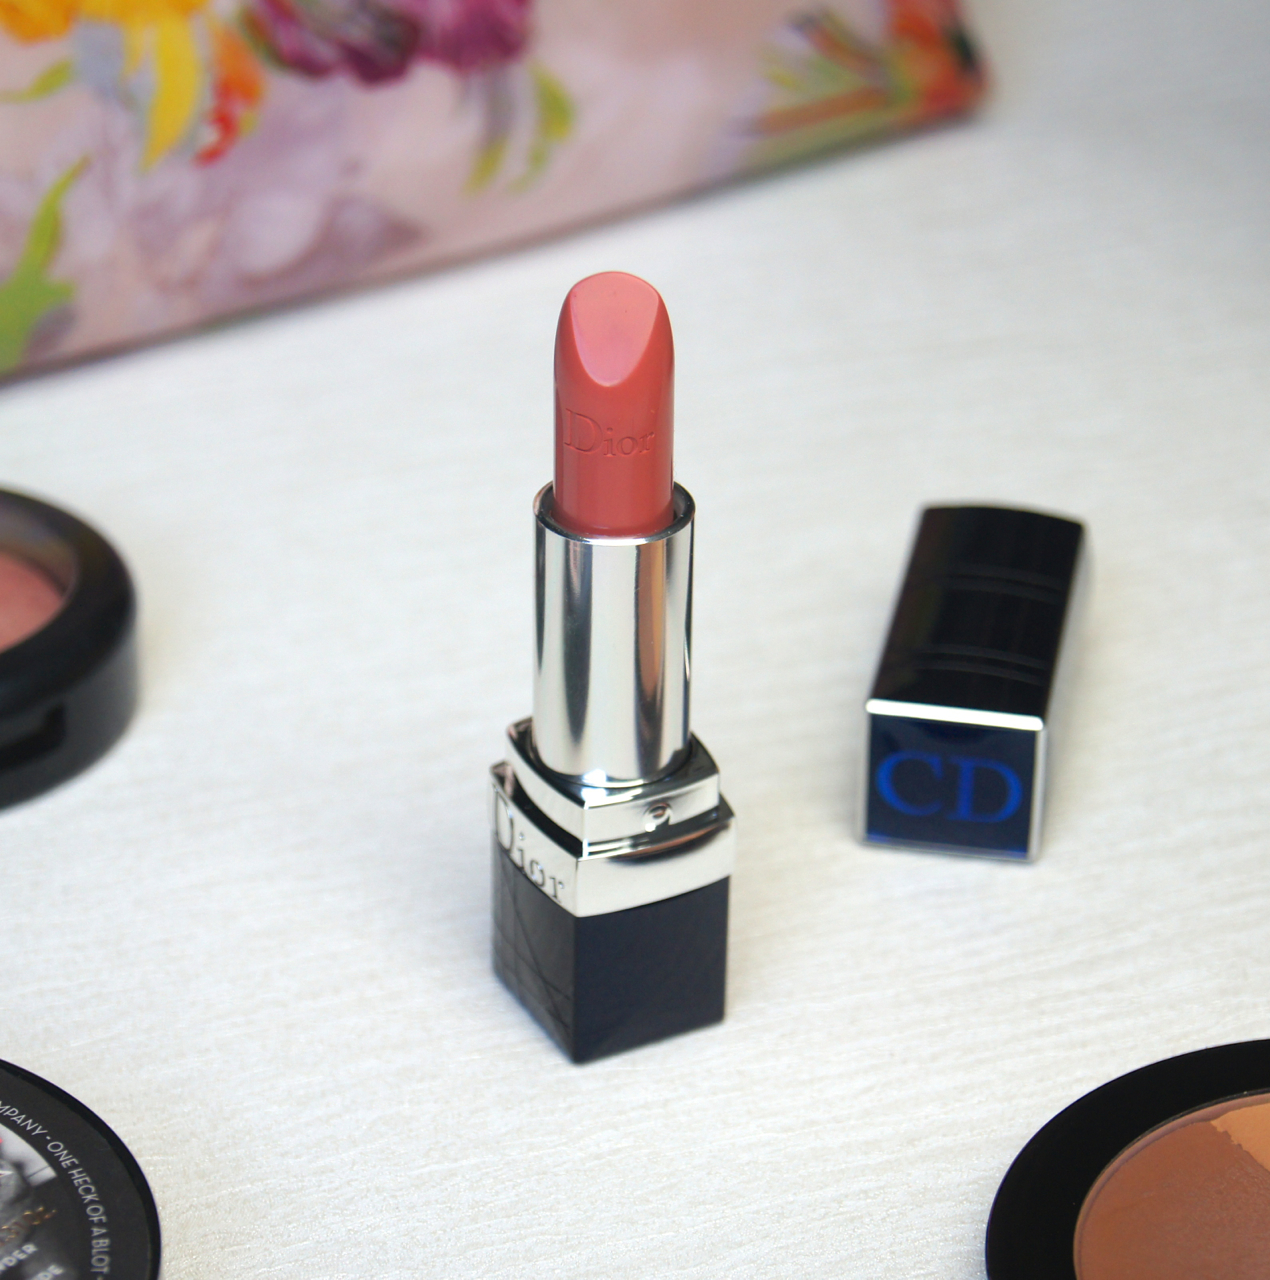 dior rouge dior nude lip blush lipstick grege review swatch